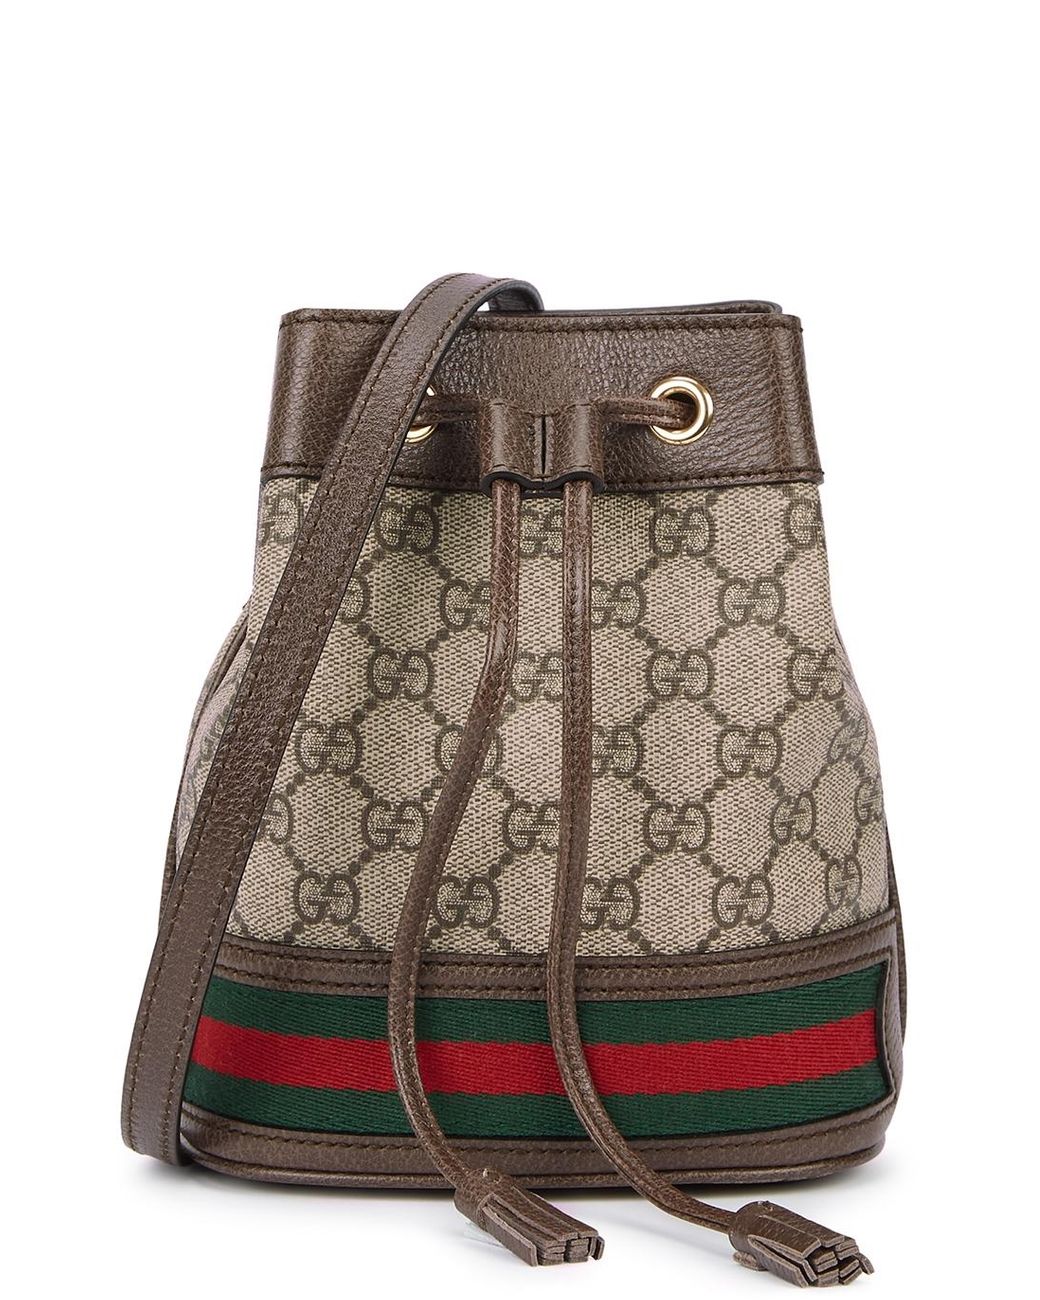 Gucci Ophidia GG Mini Monogrammed Bucket Bag in Beige (Natural) - Lyst